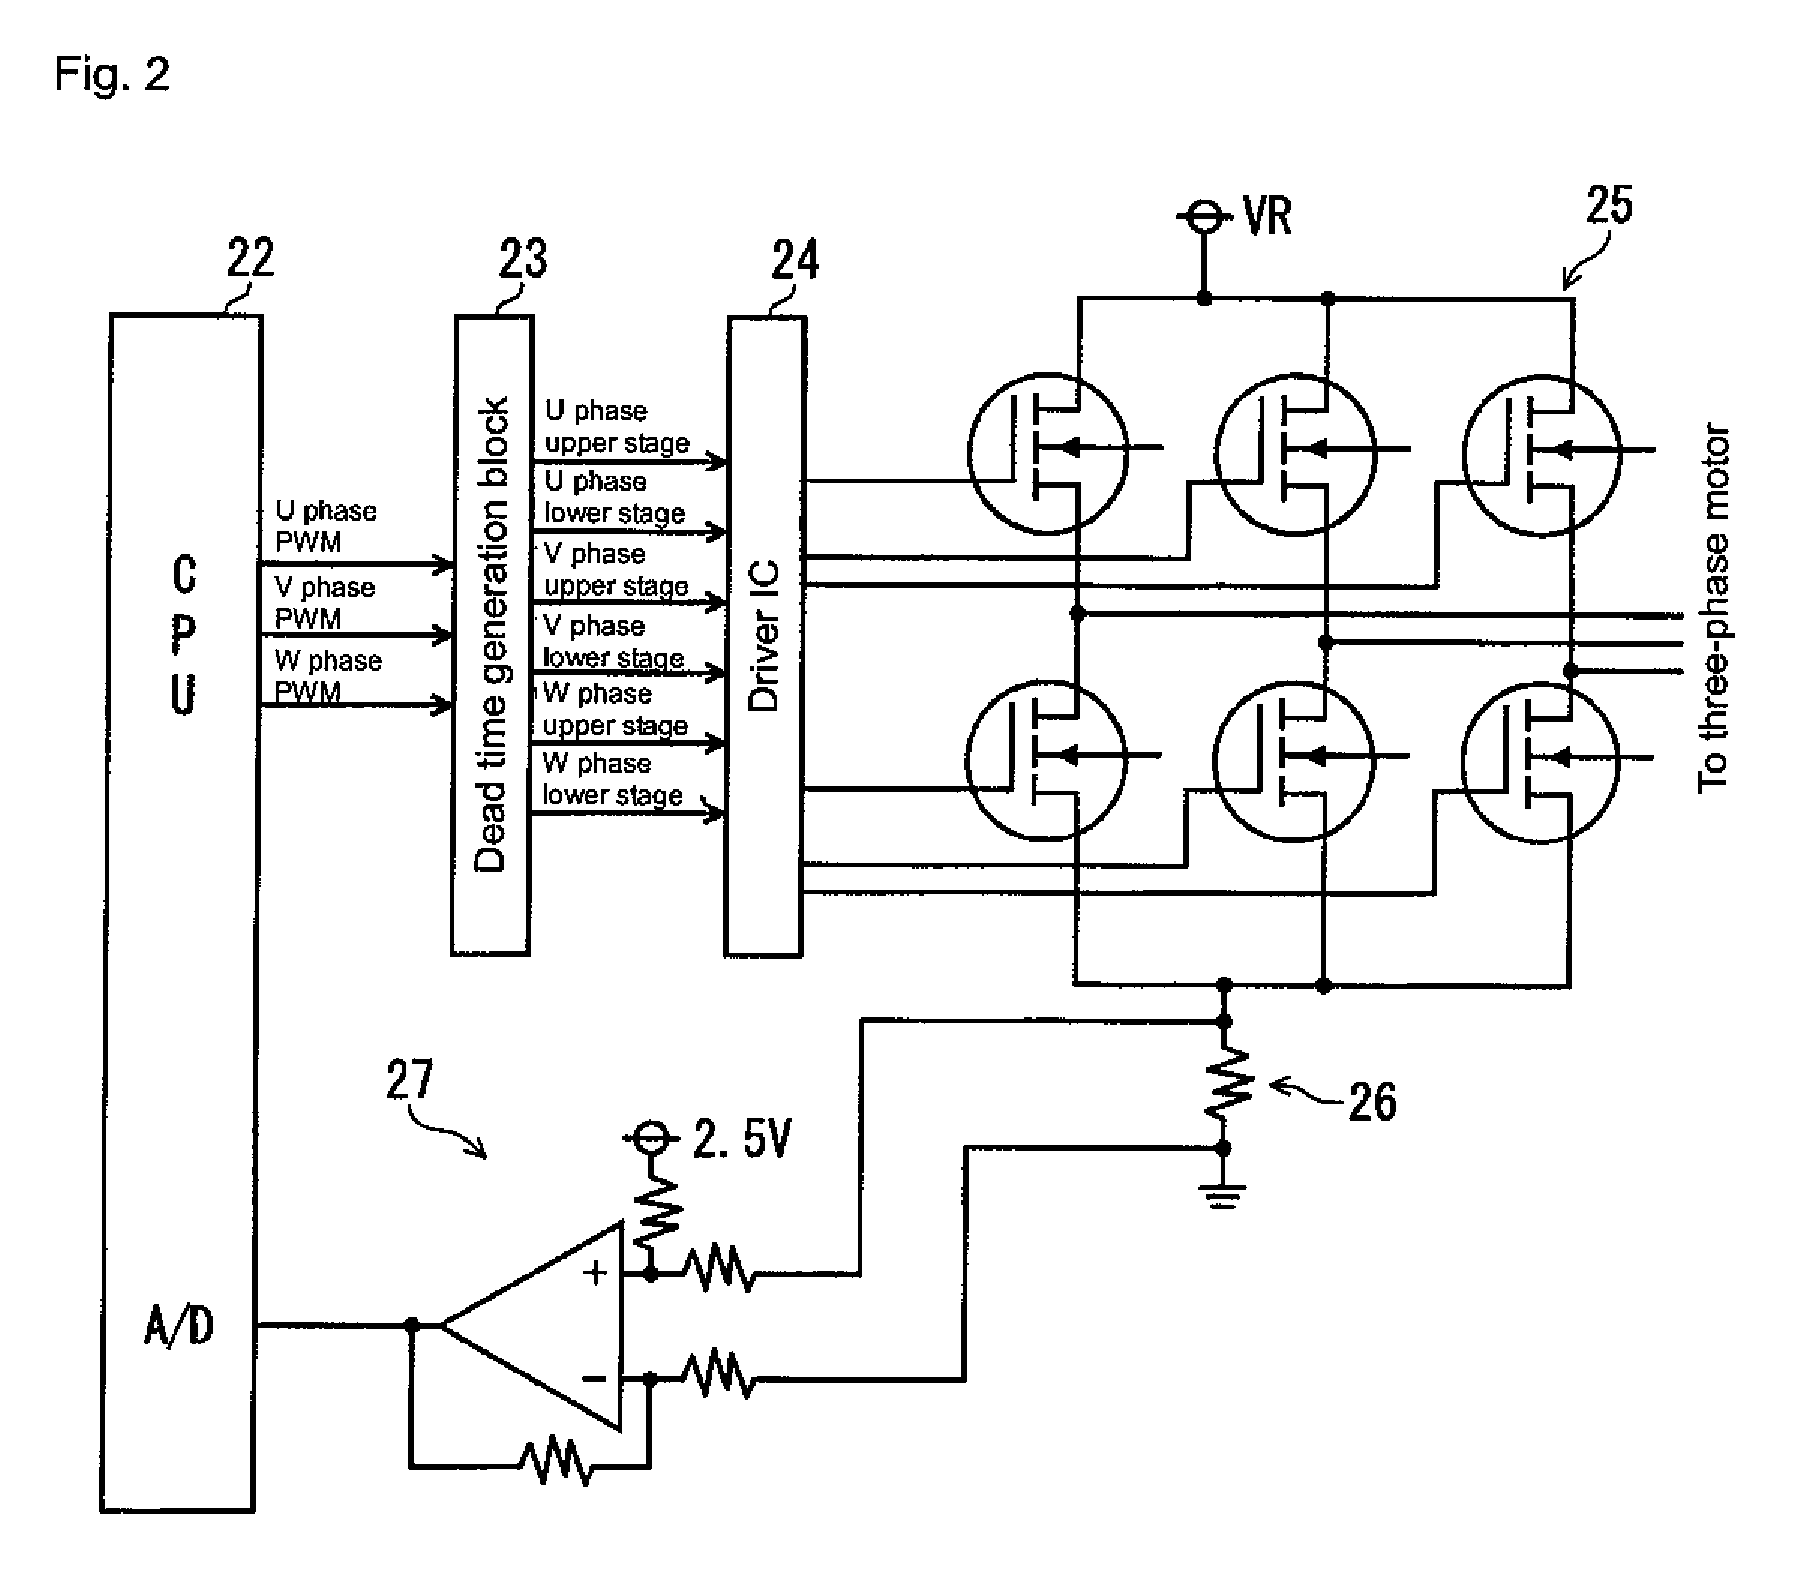 Controller of multi-phase electric motor